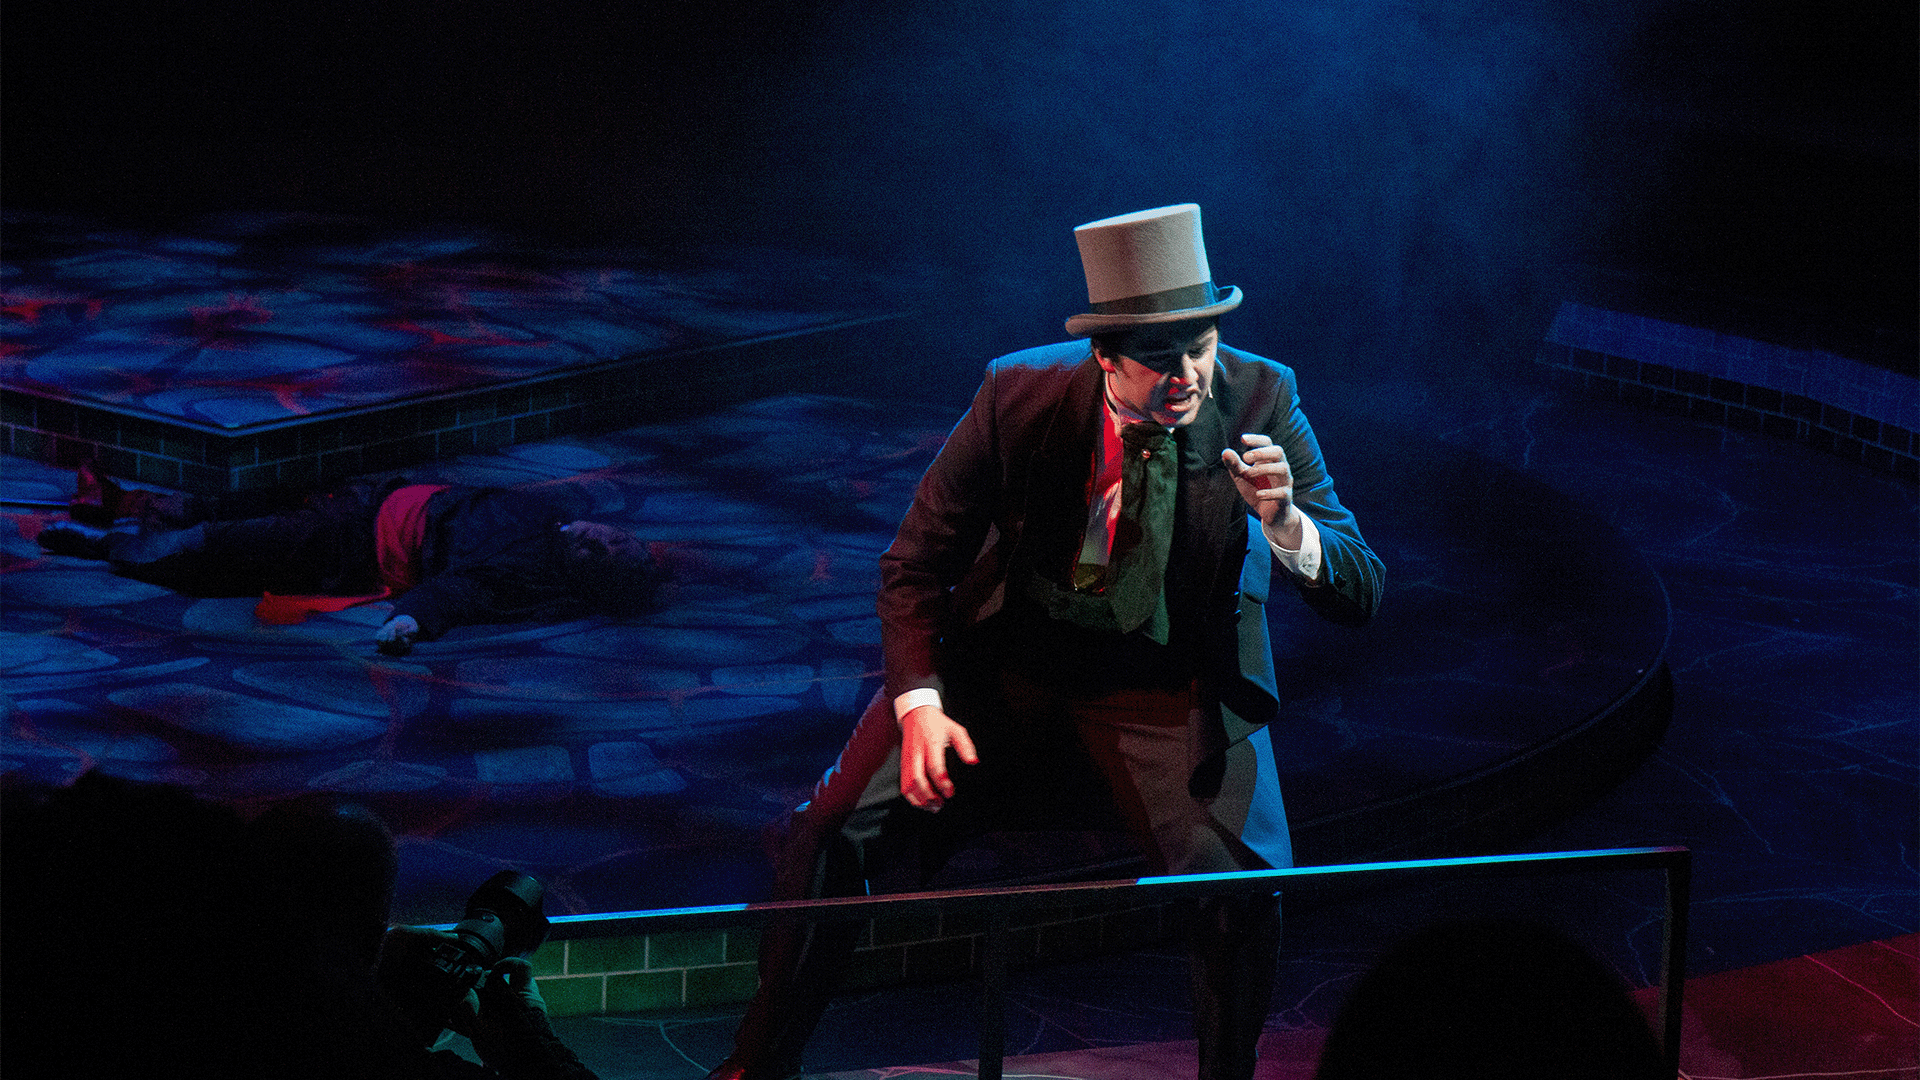 Jackson Lods who plays Dr. Jekyll and Mr. Hyde in Stewart Theatre during final dress rehearsal.